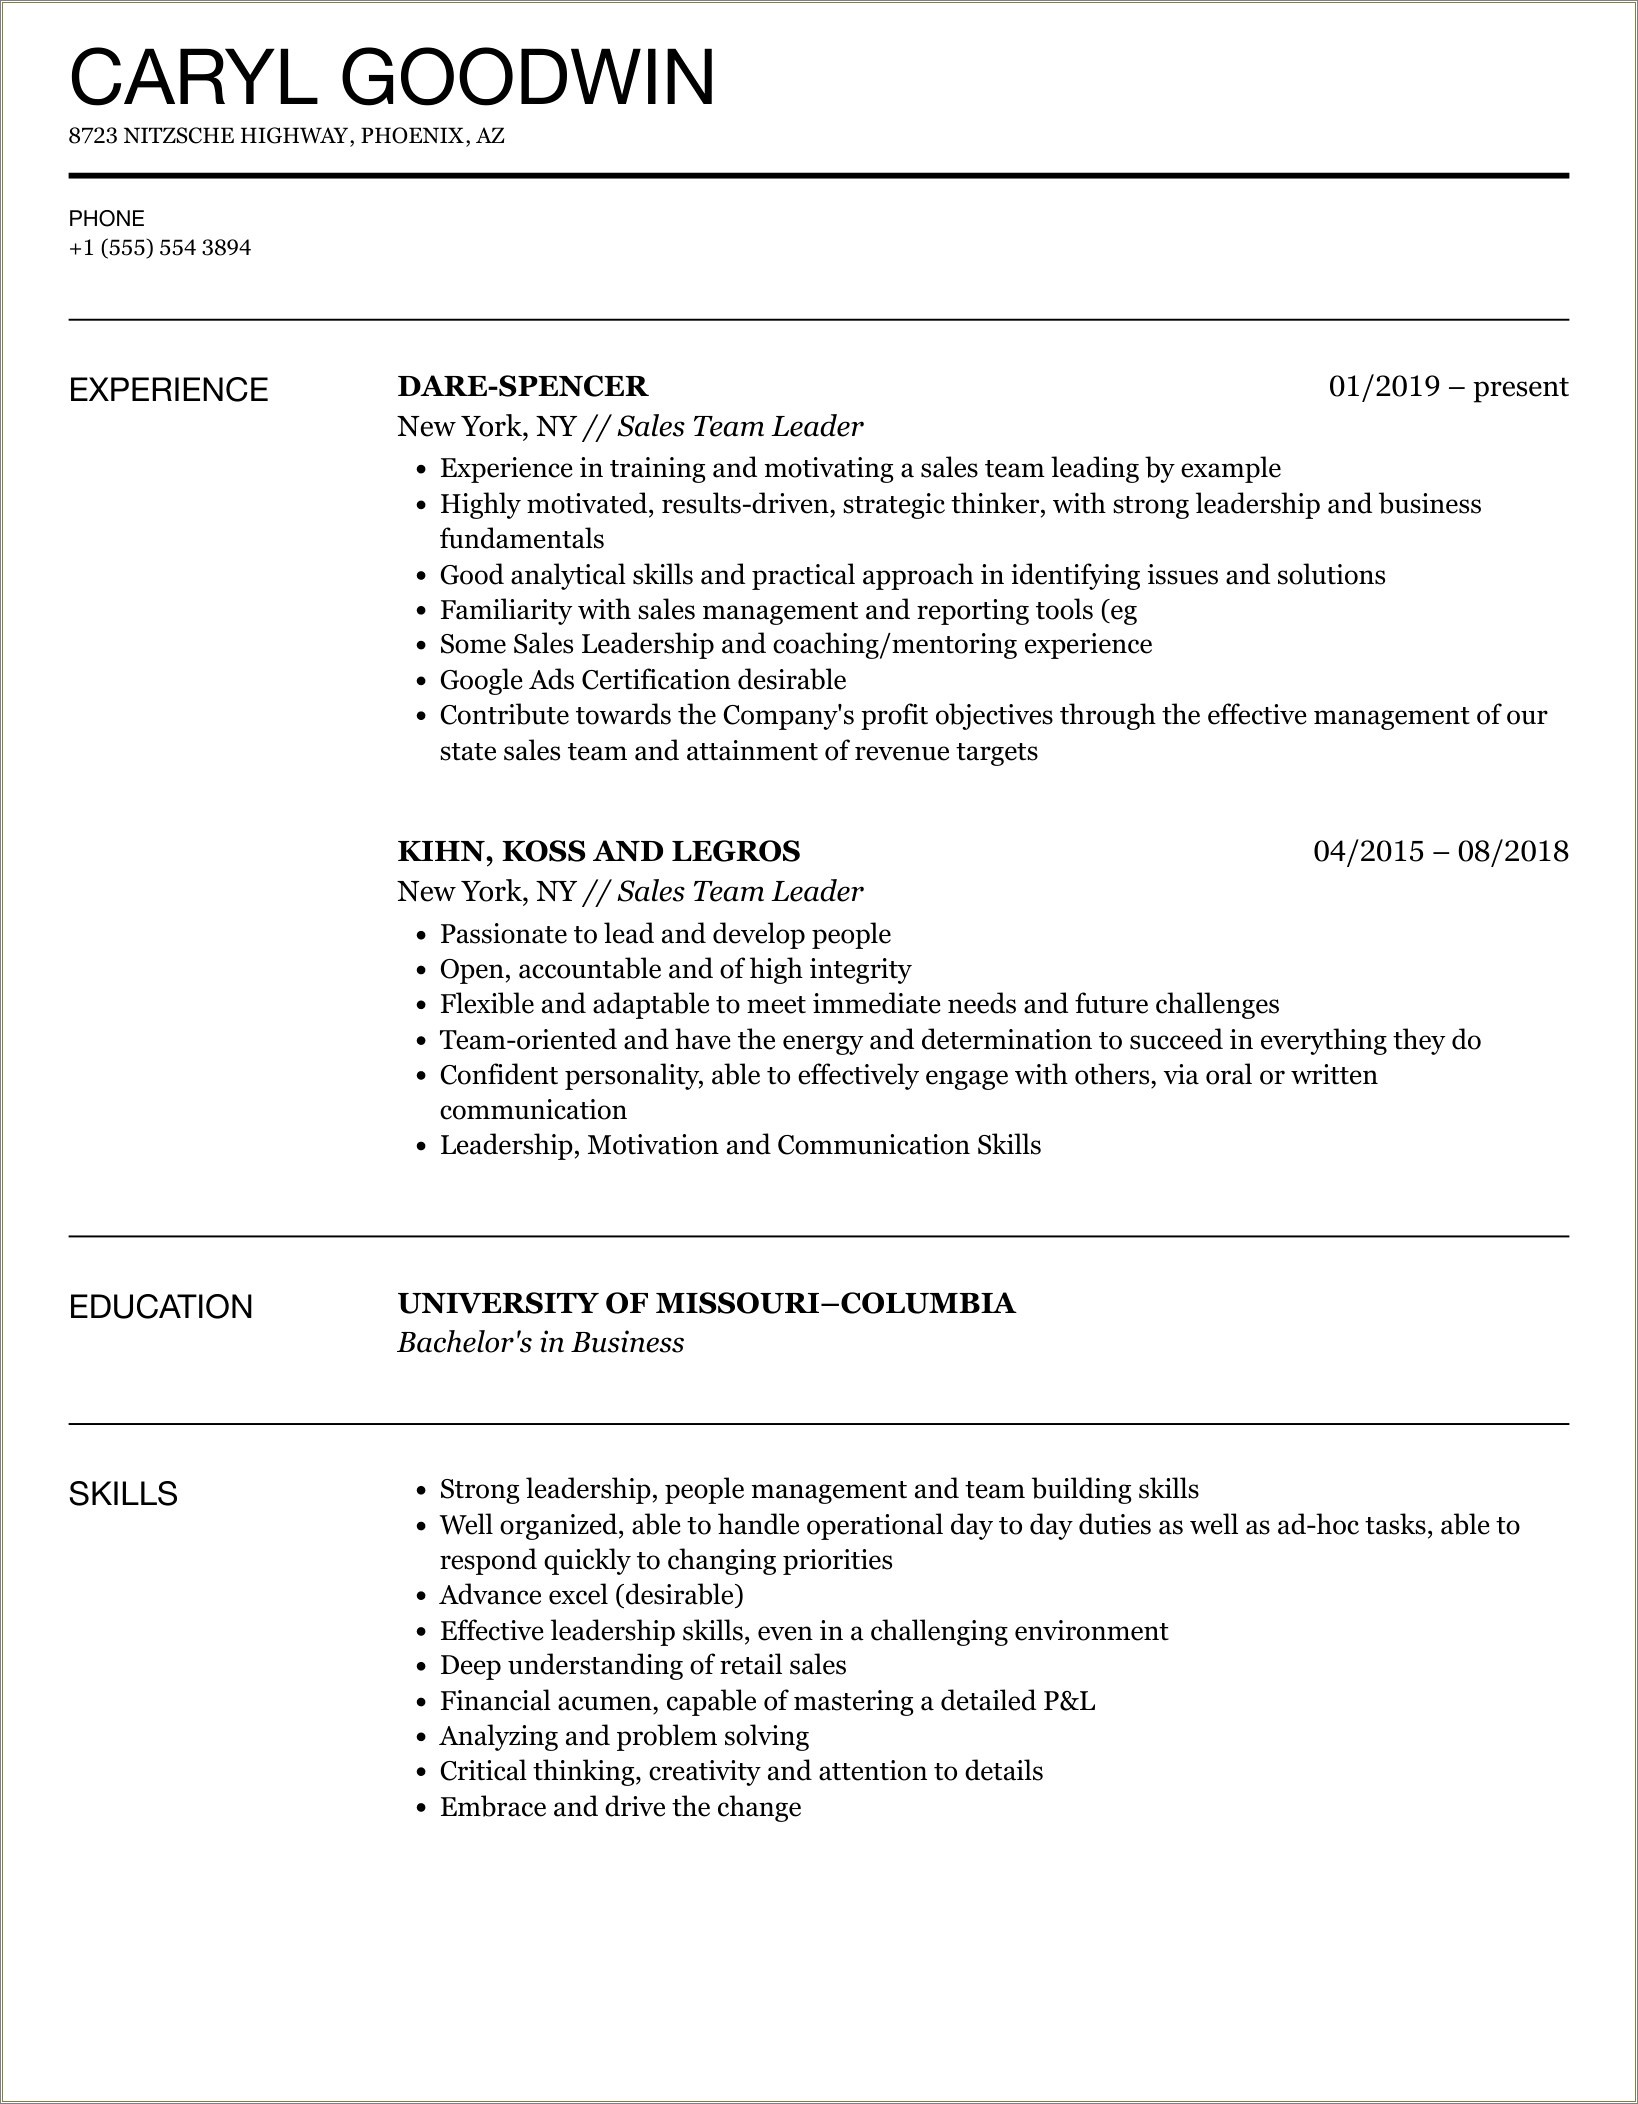 Sales Responsibilites That Look Good On A Resume